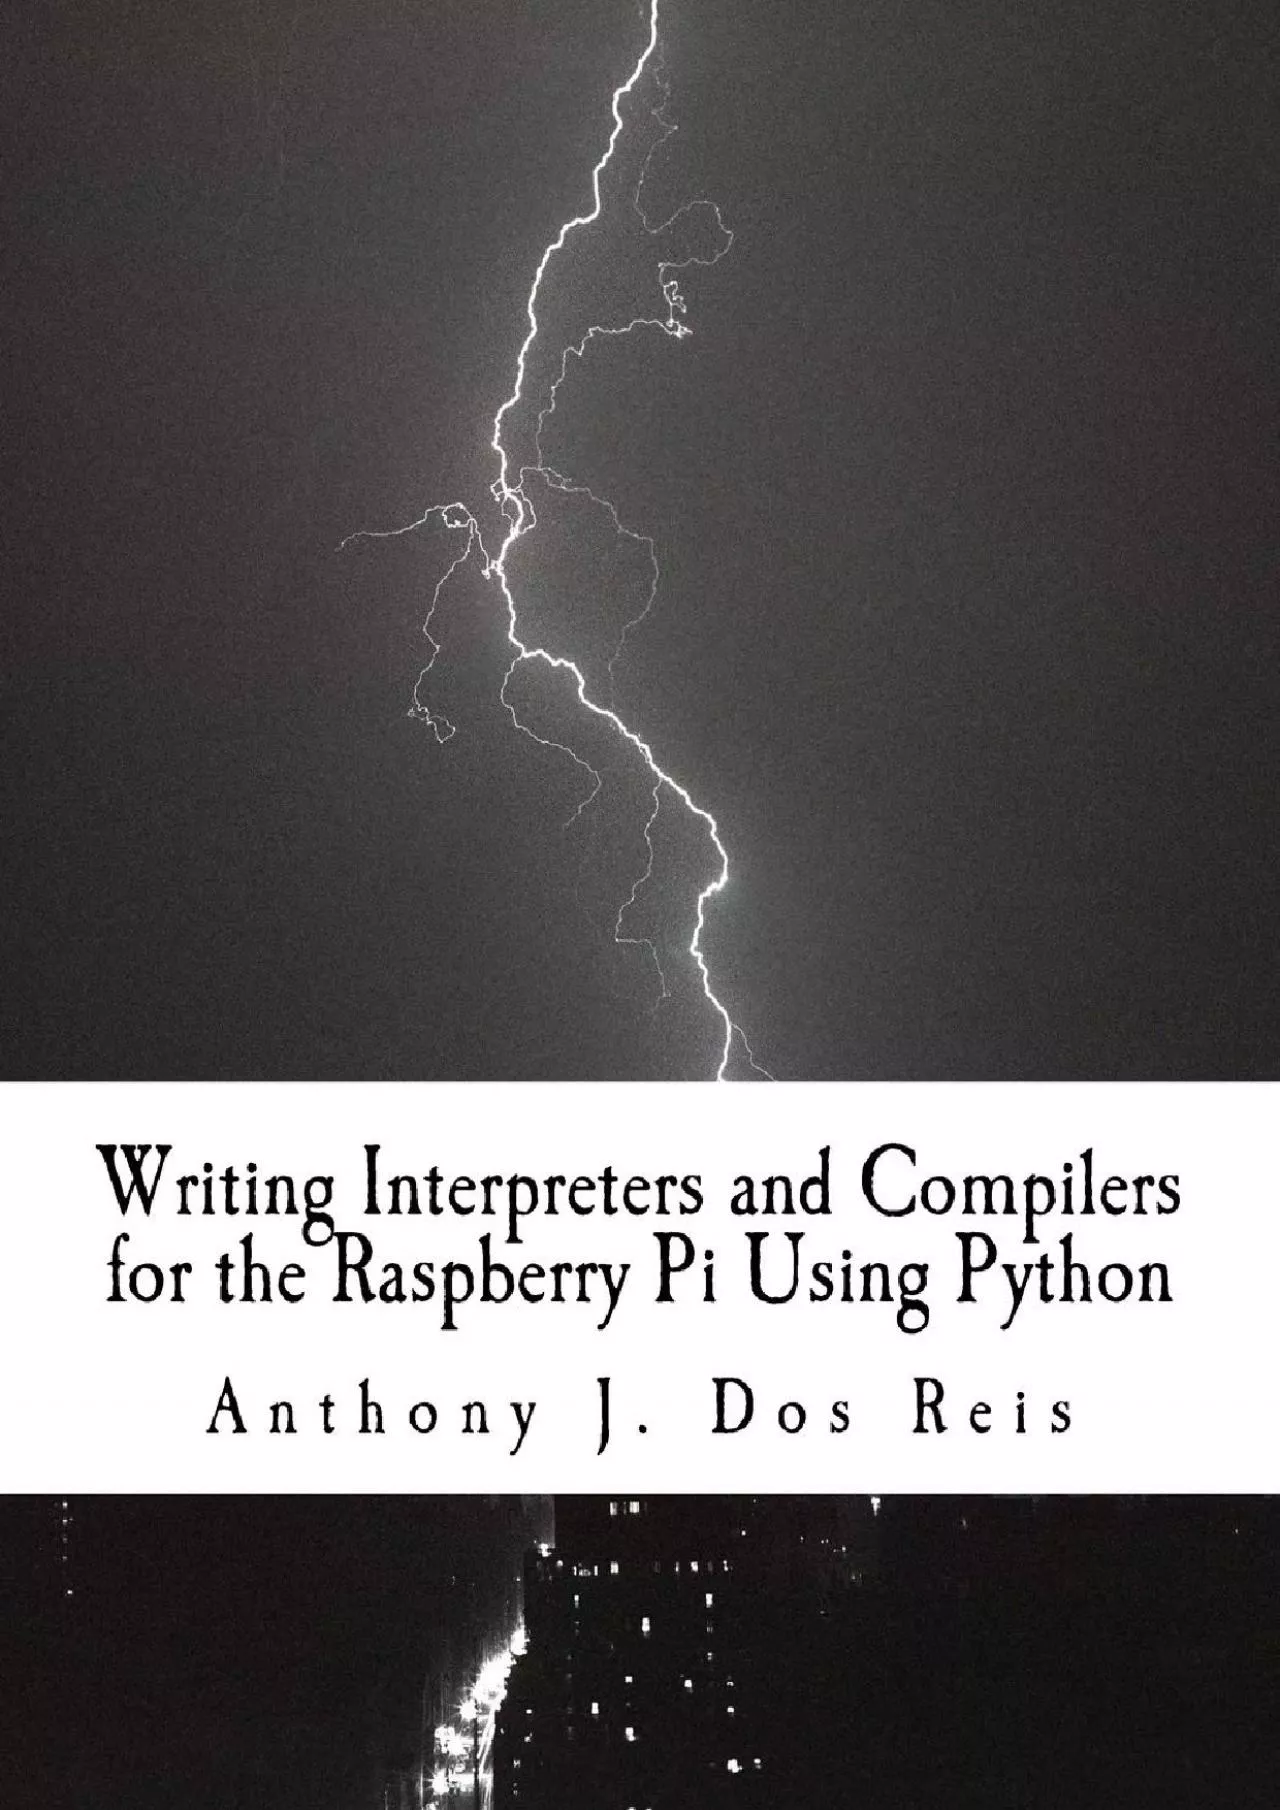 [READING BOOK]-Writing Interpreters and Compilers for the Raspberry Pi Using Python